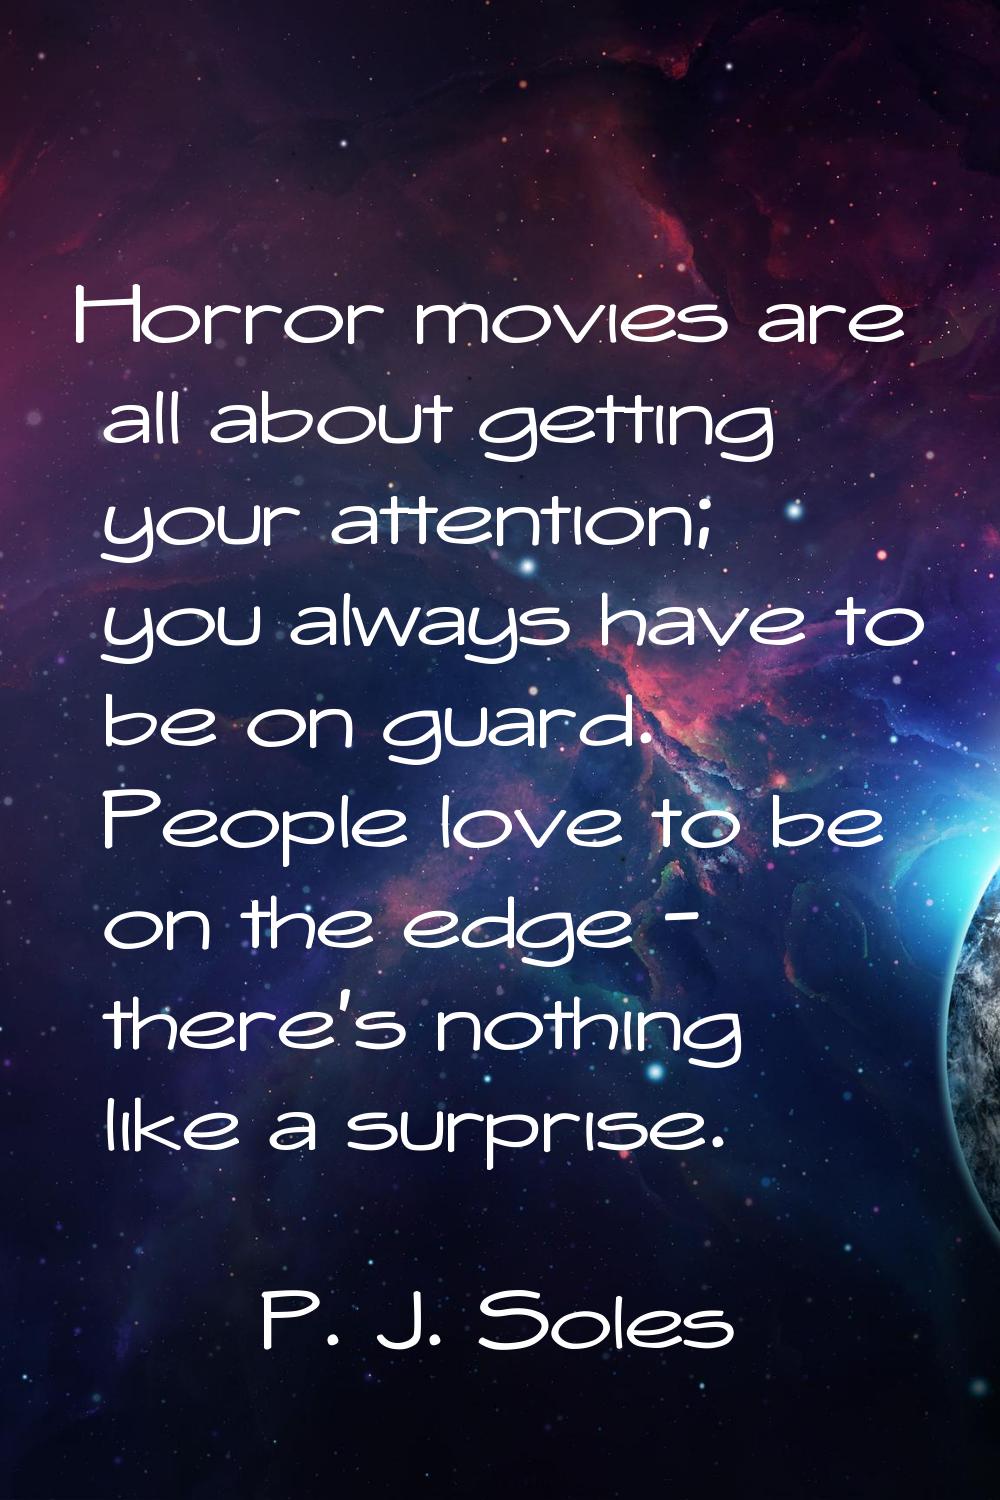 Horror movies are all about getting your attention; you always have to be on guard. People love to 